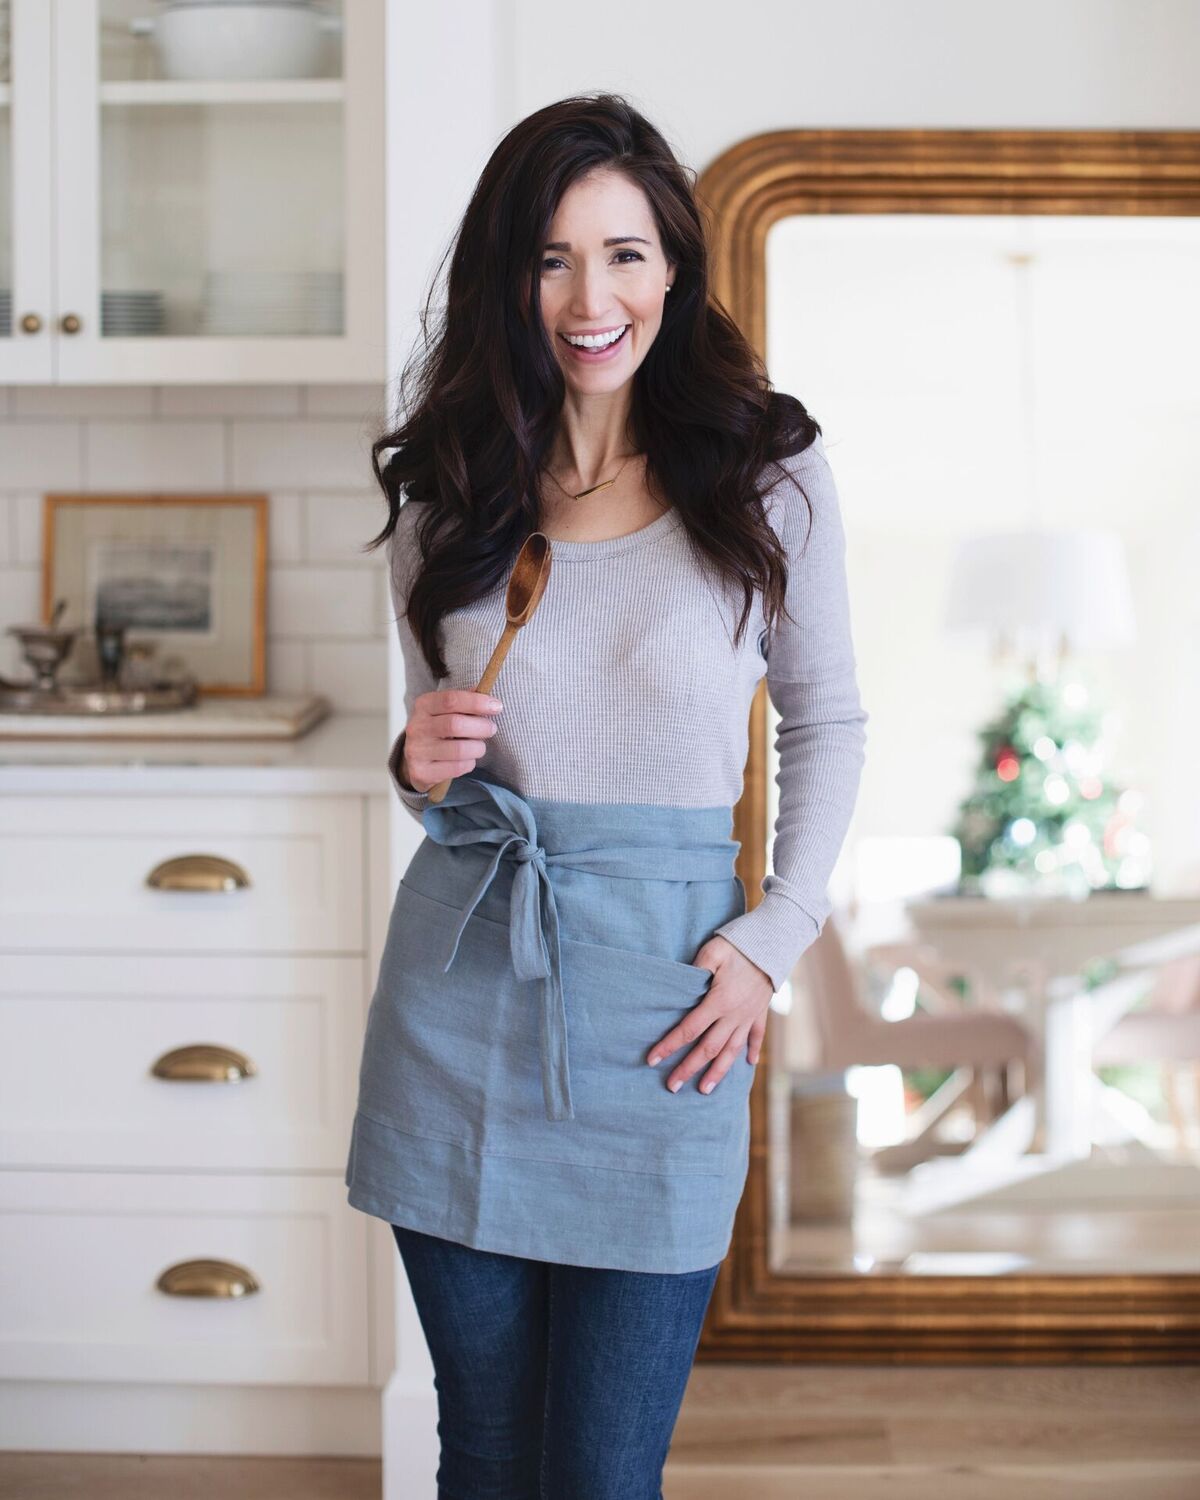 Gifts made with love for the foodie on your list! Like this perfect linen apron.